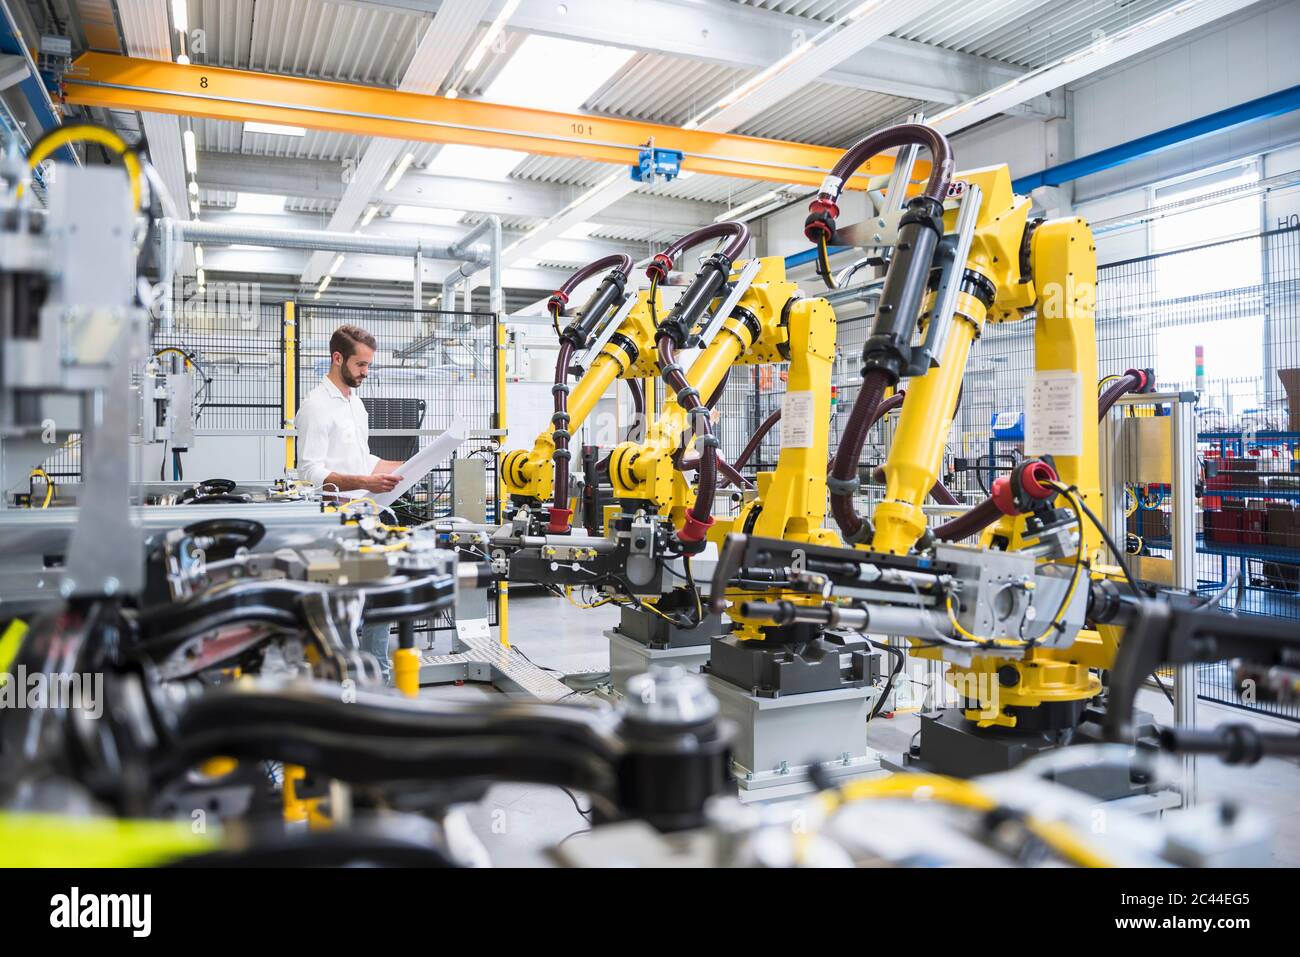 Young engineer reading paper while standing by robotic arms in automated industry Stock Photo